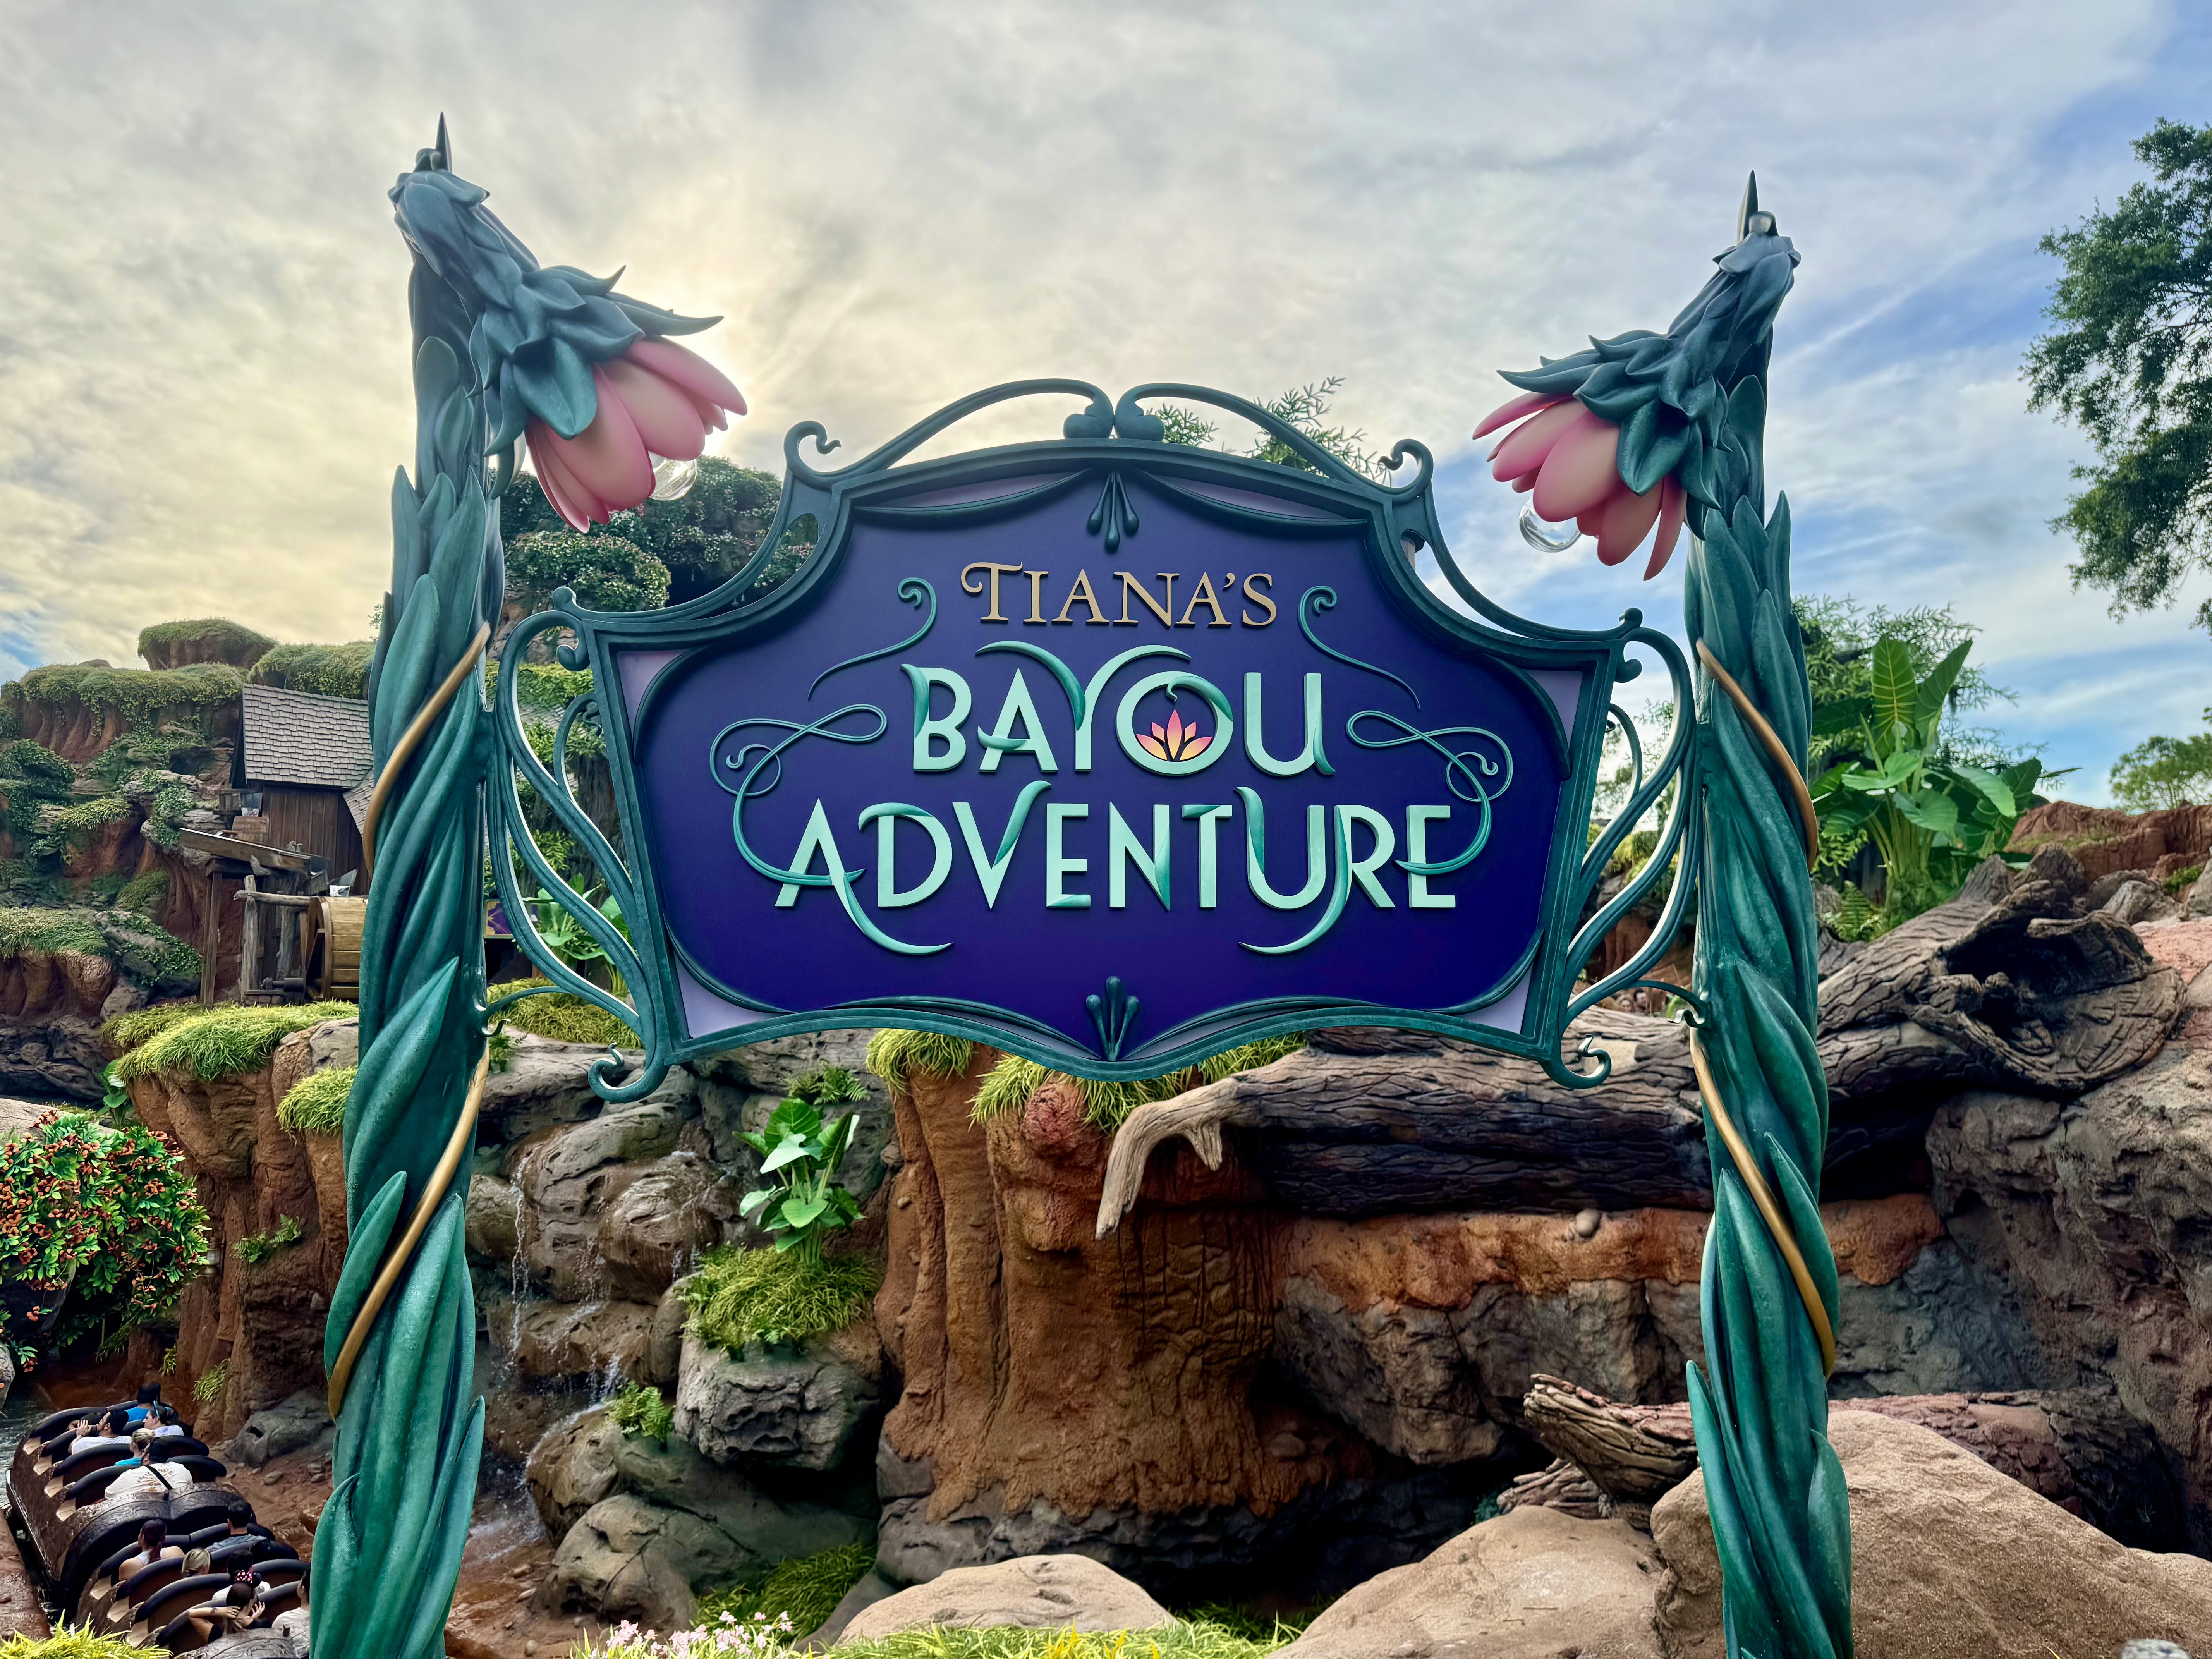 We “Dig a Little Deeper” in a Thorough & Detailed Review of Tiana’s Bayou Adventure